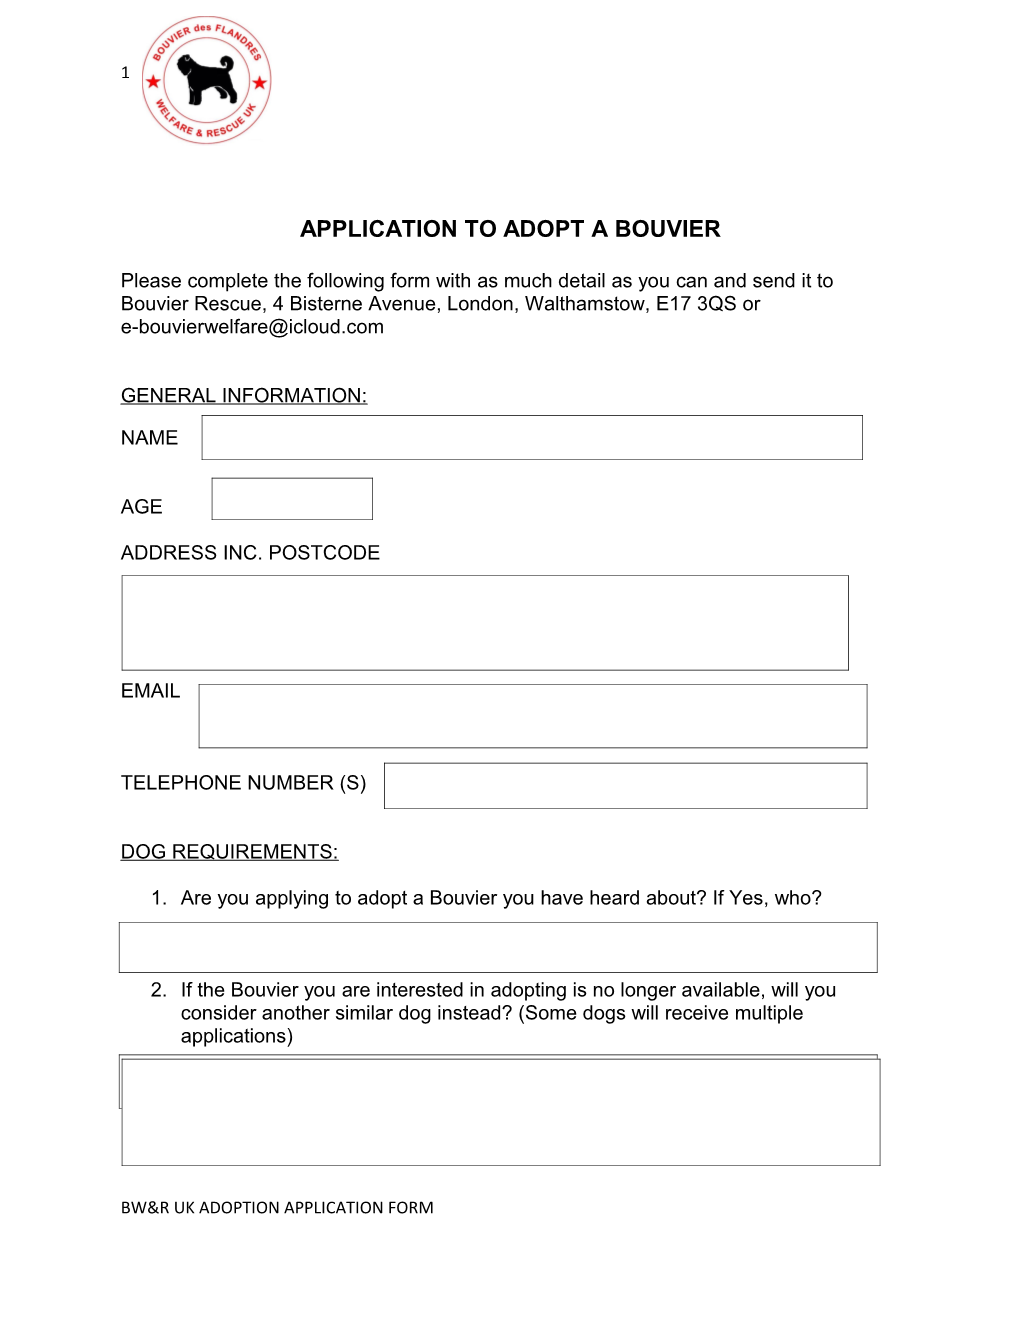 Application to Adopt a Bouvier